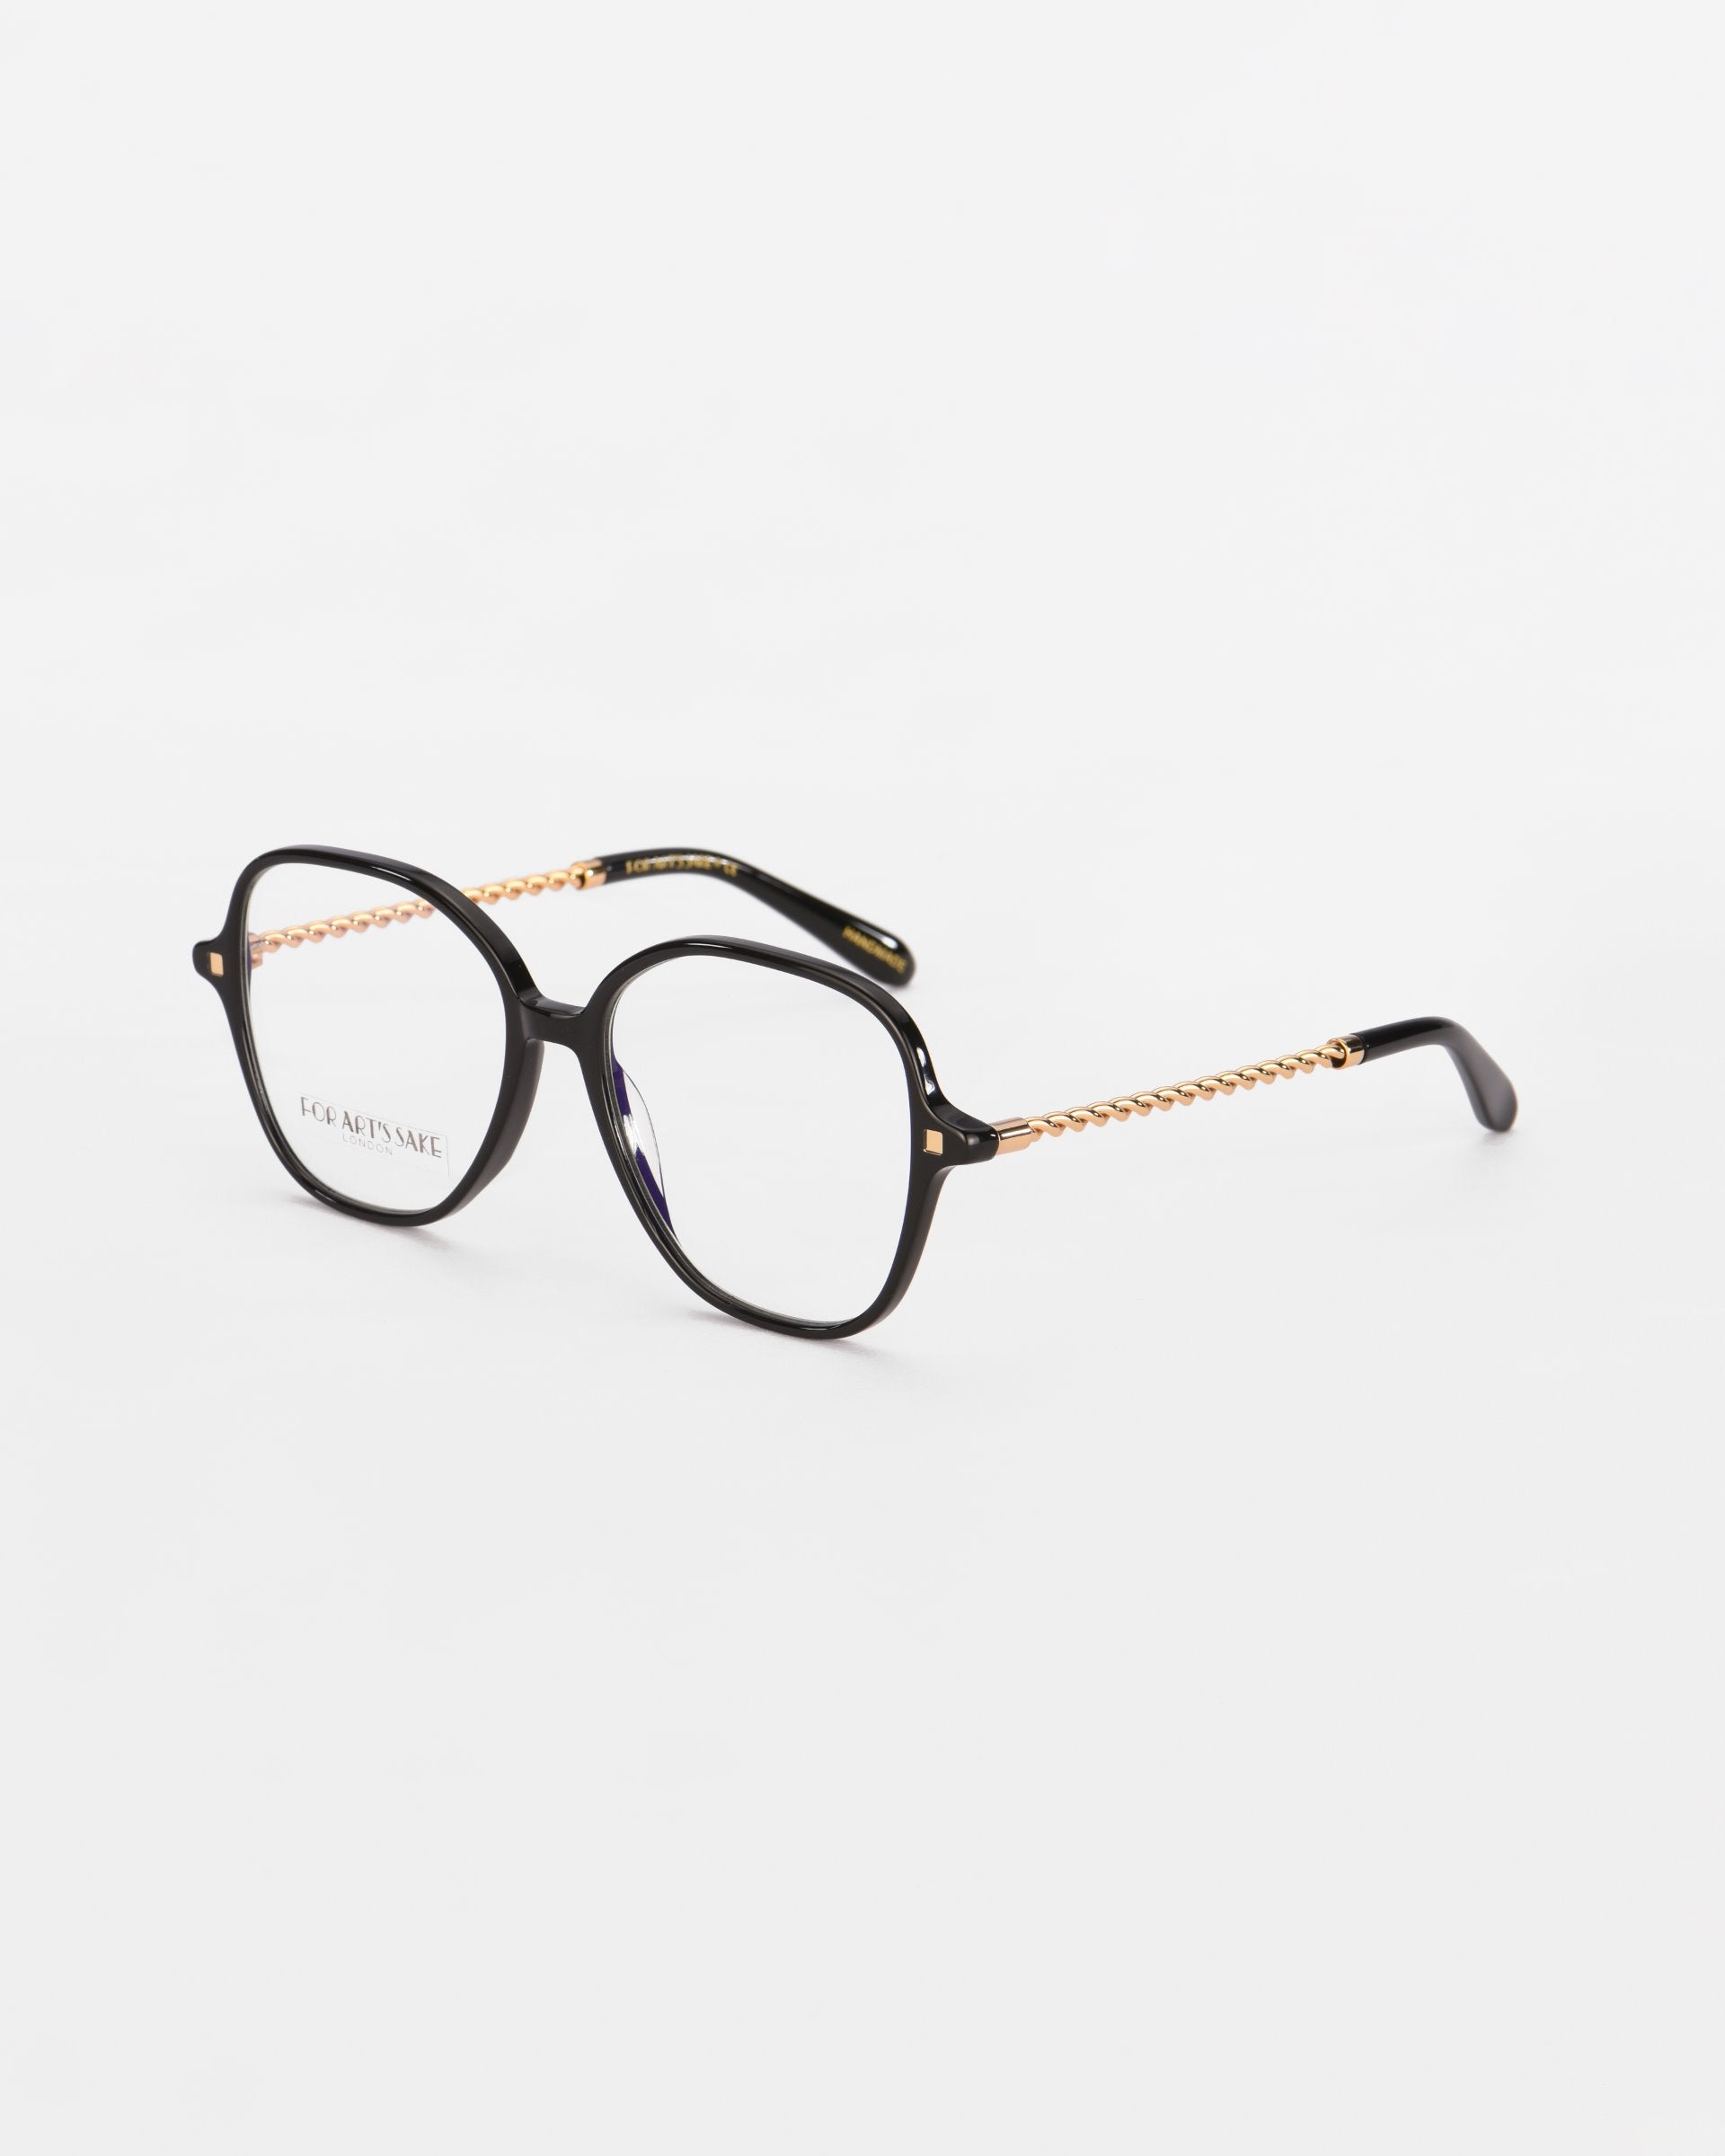 A pair of black Dumpling eyeglasses with a square frame and gold arms by For Art&#39;s Sake®. The arms have a decorative chain-like pattern. The lenses offer blue light filter protection. The glasses are placed on a white surface.